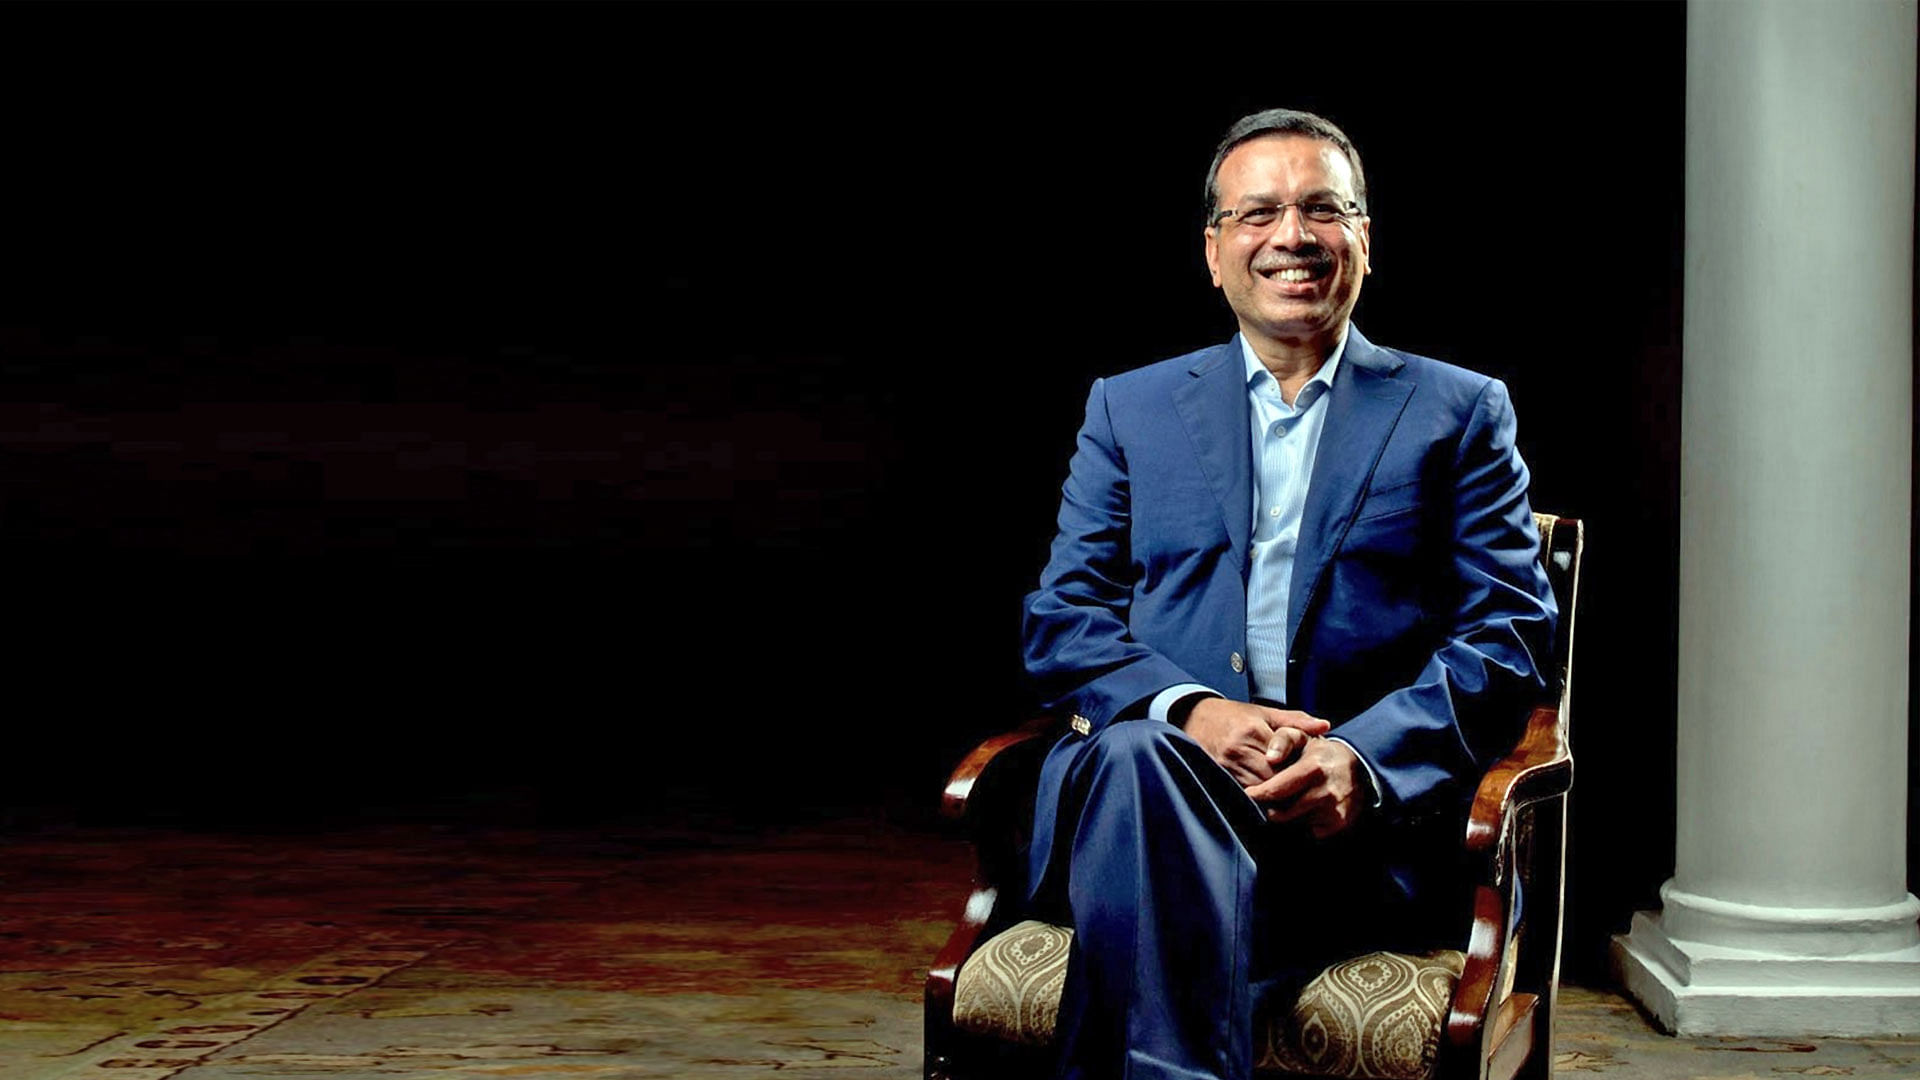 Commenting on the development RPSG Group Chairman Sanjiv Goenka said that Fortune India will be a great addition to the group stable of power-brands.